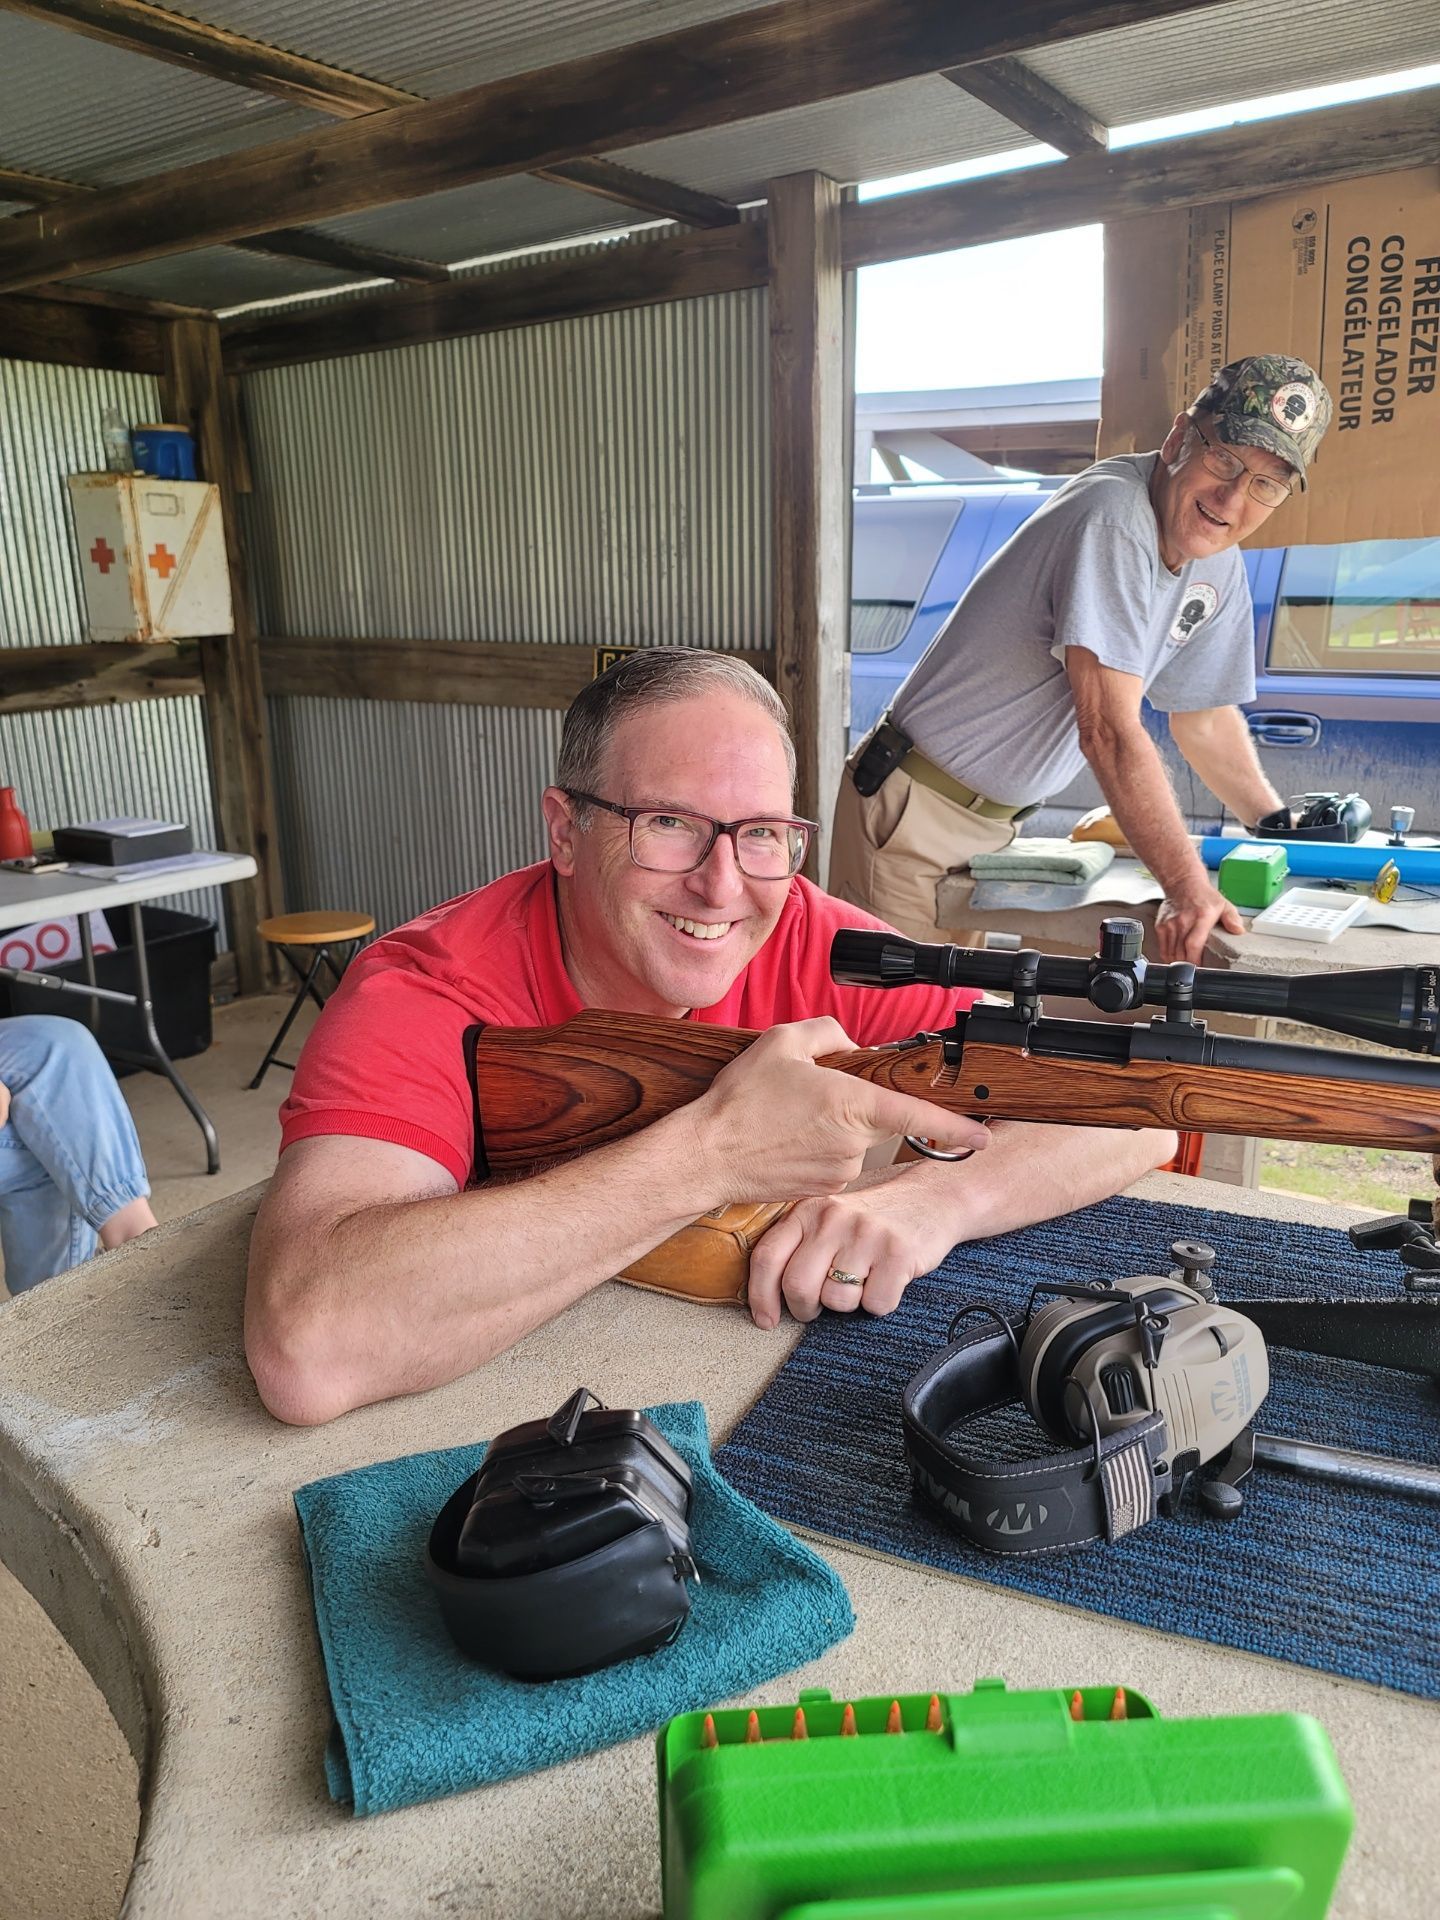 man in red shirt and glasses smiling at camera while holding rifle at a gun range